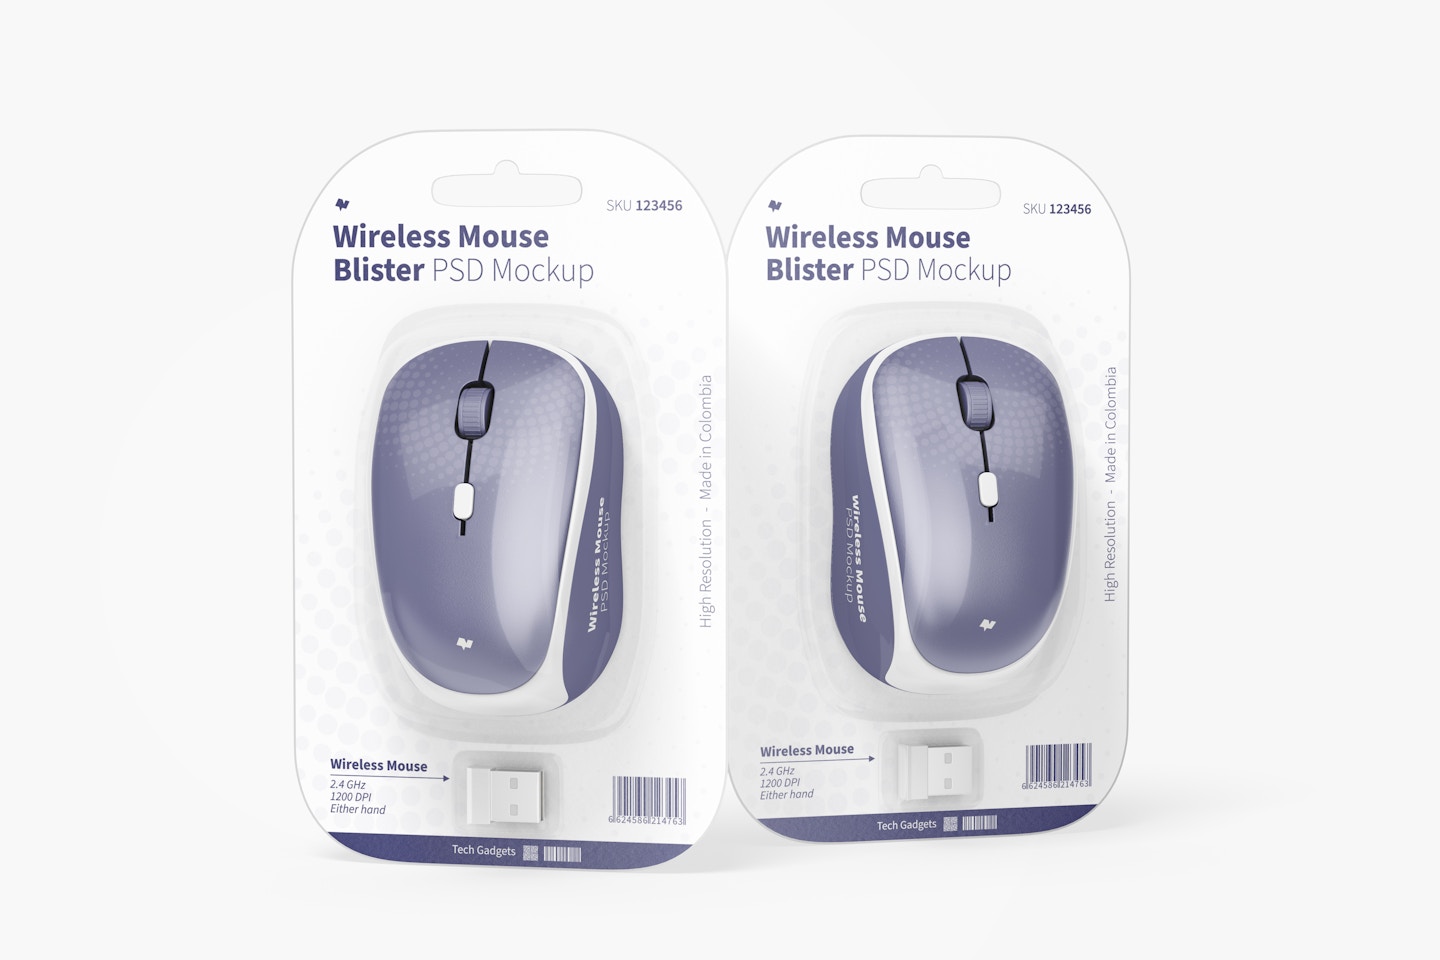 Wireless Mouse Blisters Mockup